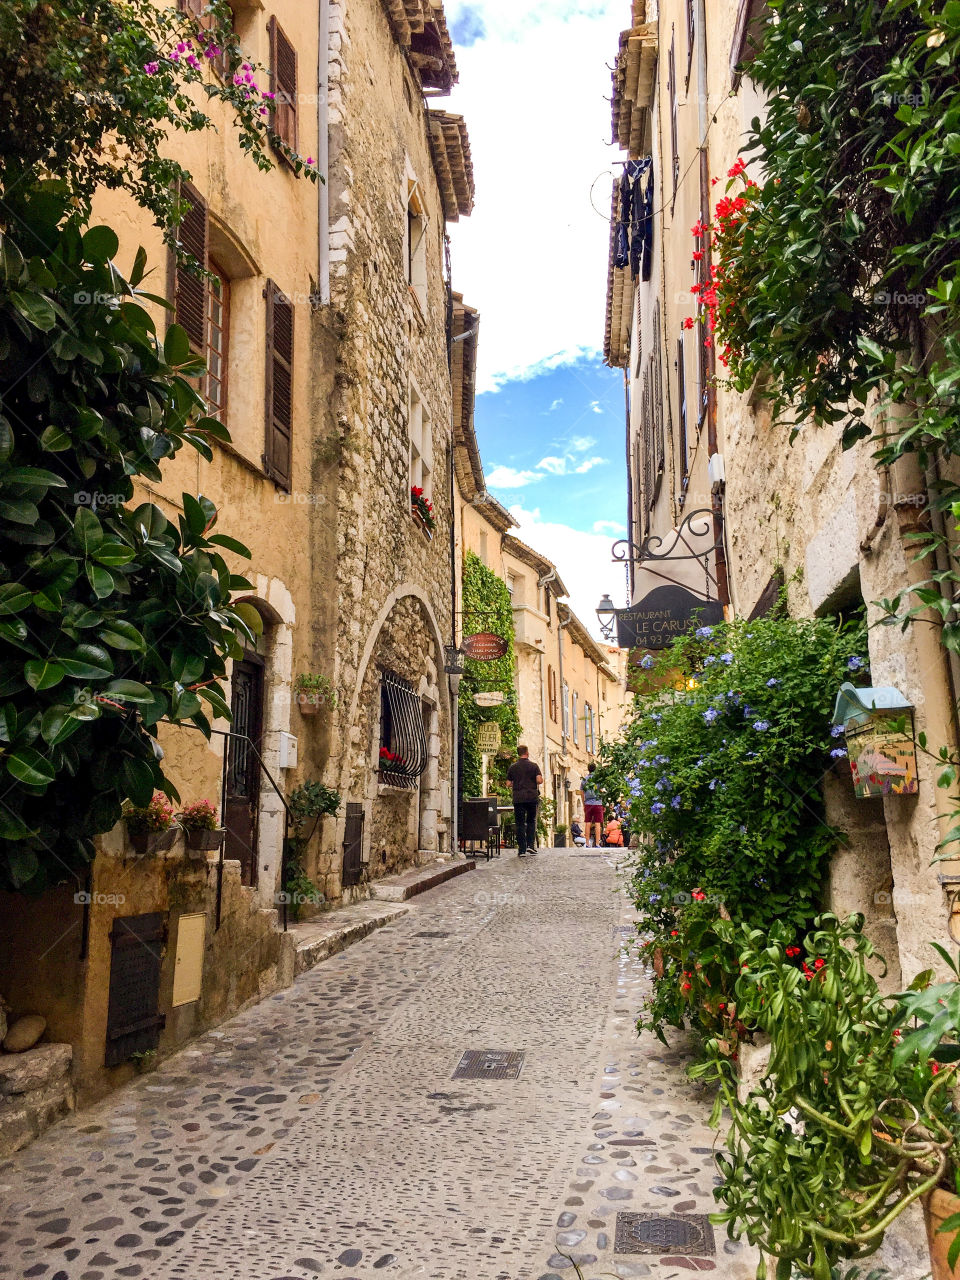 Cobblestone street with gardens and stone buildings in pretty hilltop village in Provence France 